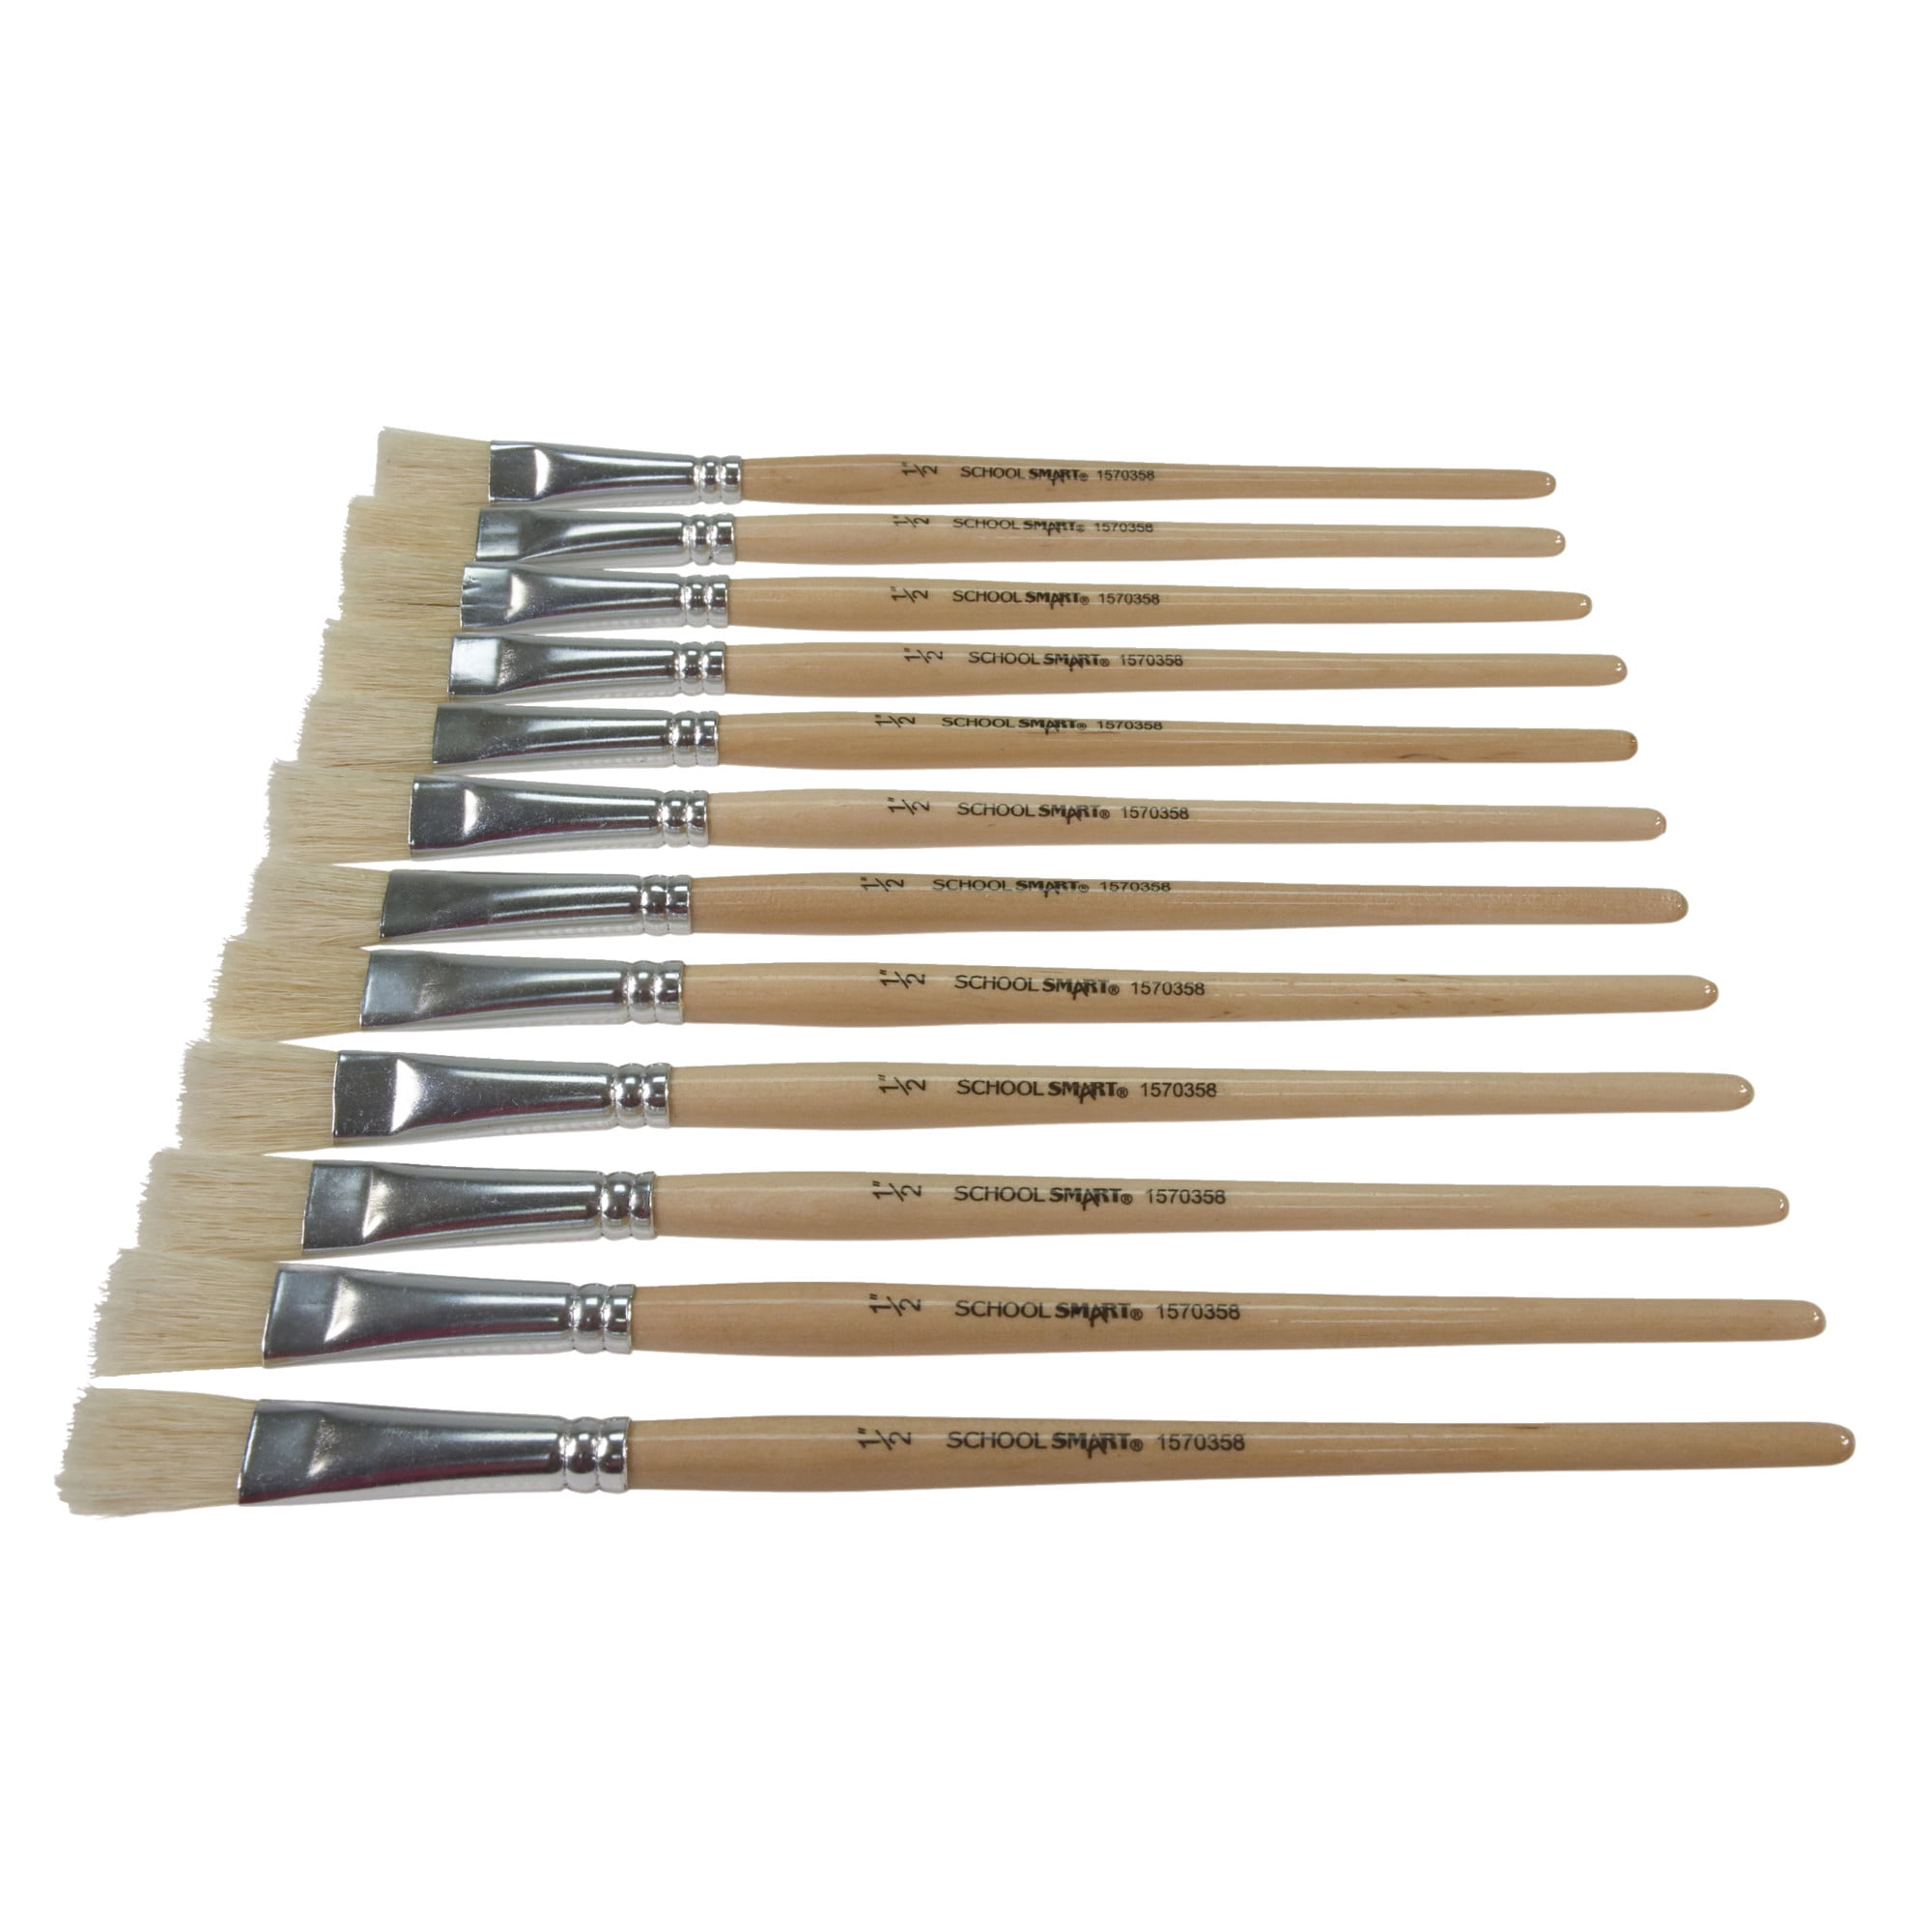 Buy School Brush Pack, Size 2 (Pack of 12) at S&S Worldwide